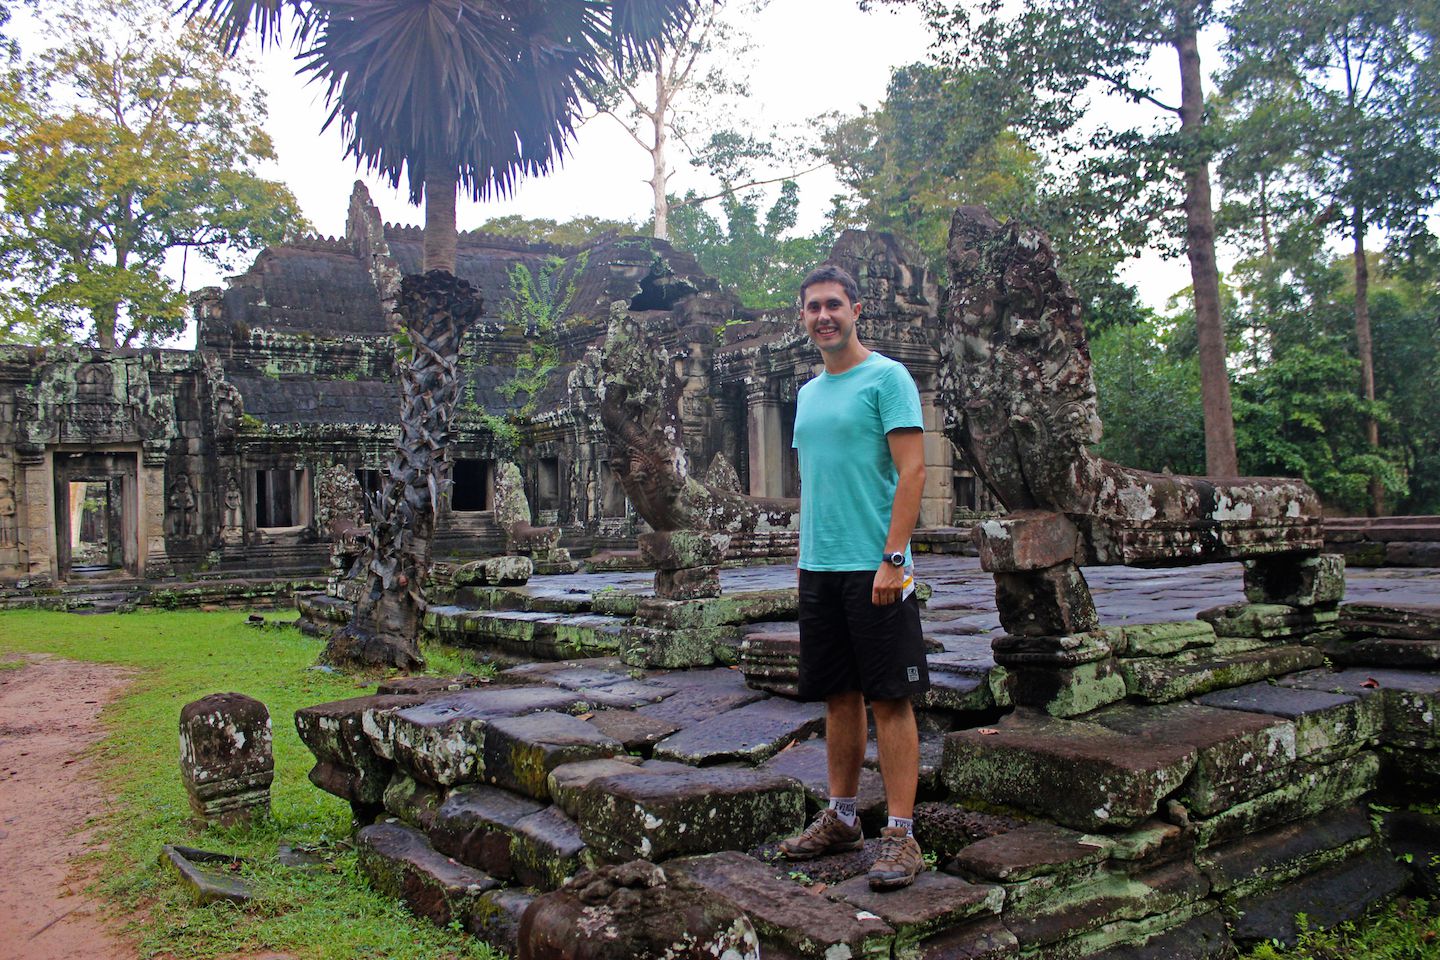 Carlos at Banteay Kdei in east Angkor